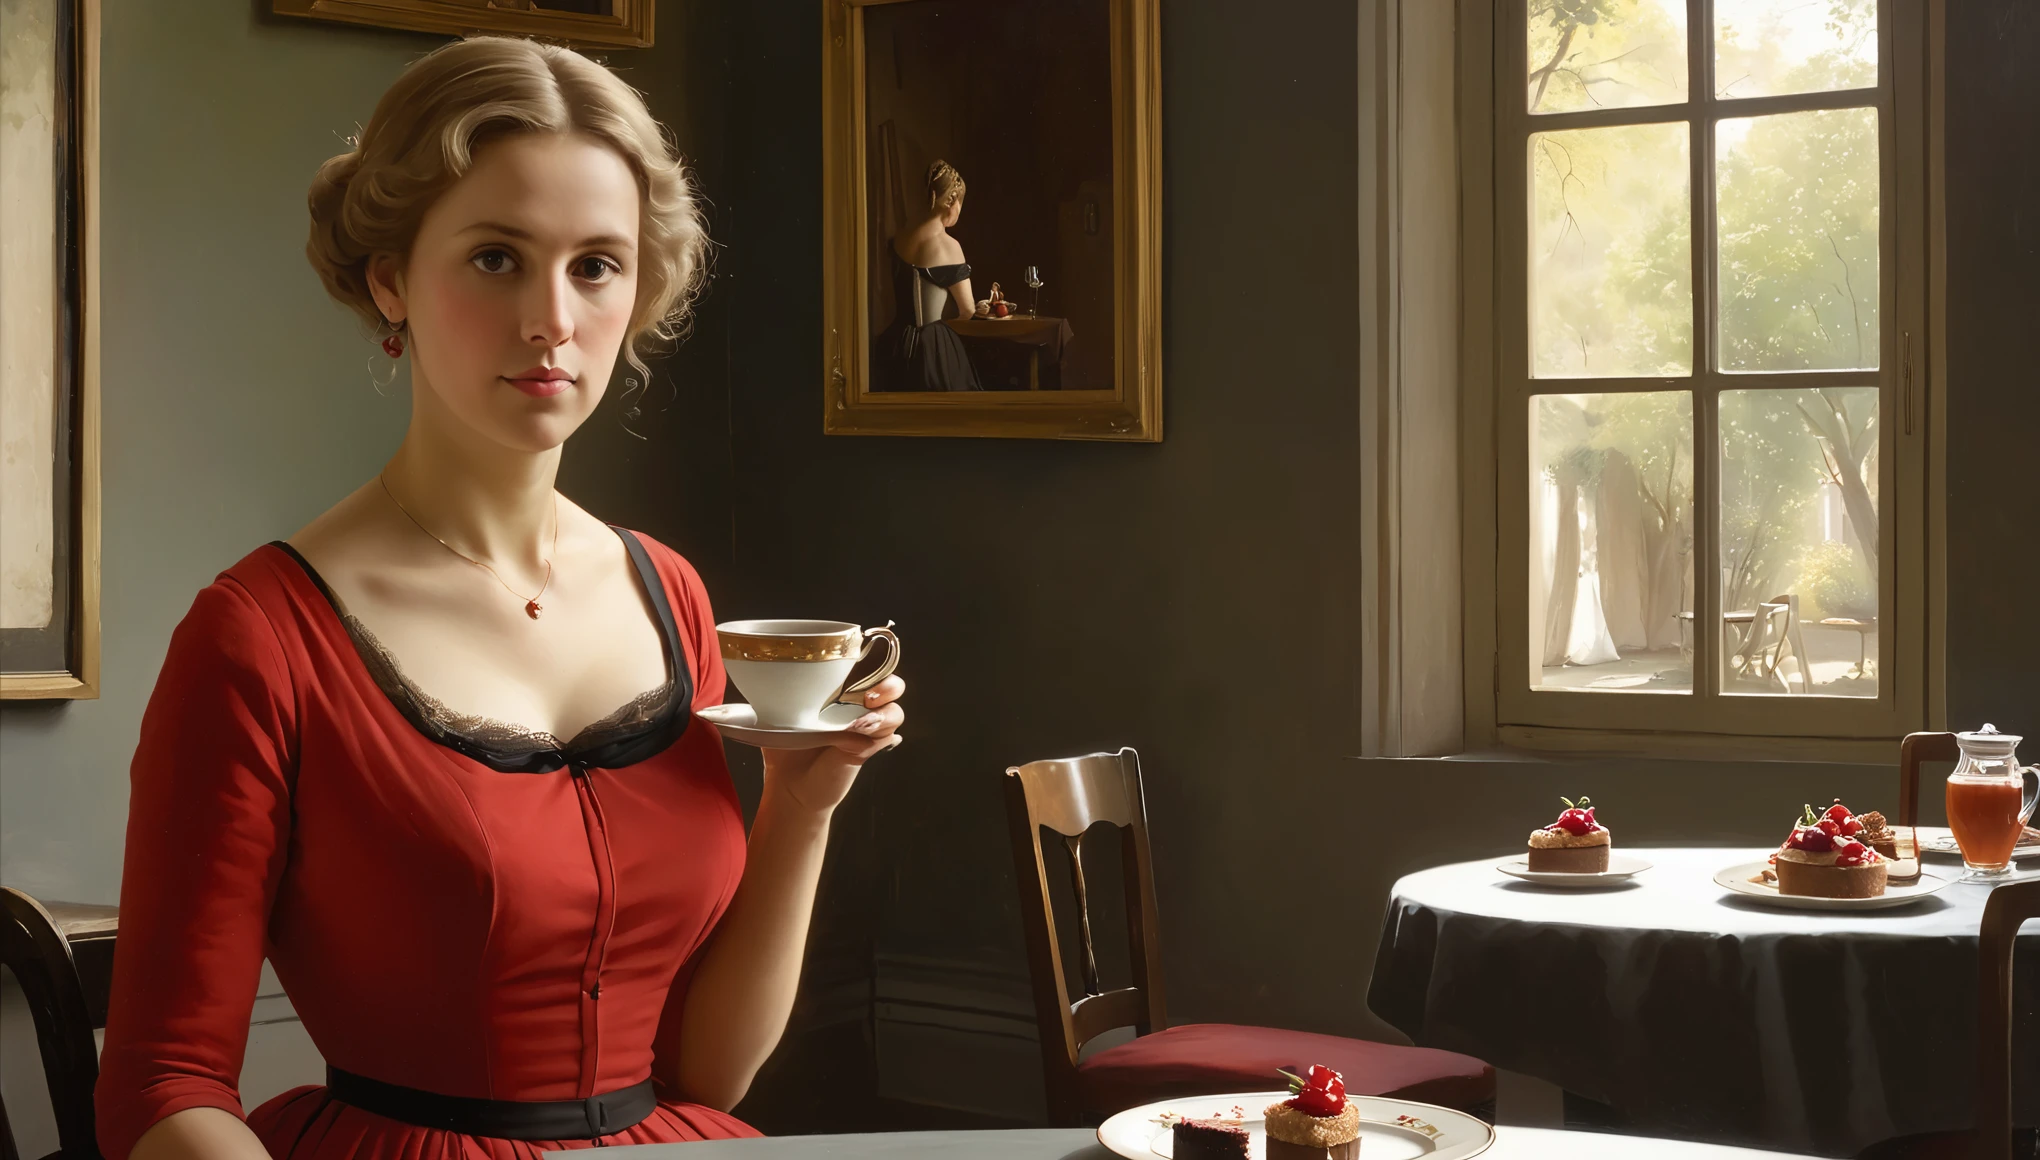 An oil painting in the style of Camille Corot portrays a 50-year woman in a short, fitted red dress with short, sparse, light curly hair drinking hot tea. On the table, there is a plate with salad and a small red cheesecake. She is contemplating divorce from her husband. In the background, the walls of a cozy Buenos Aires very small cafe adorned with paintings by the artist Camille Corot, with morning light streaming in through the window.